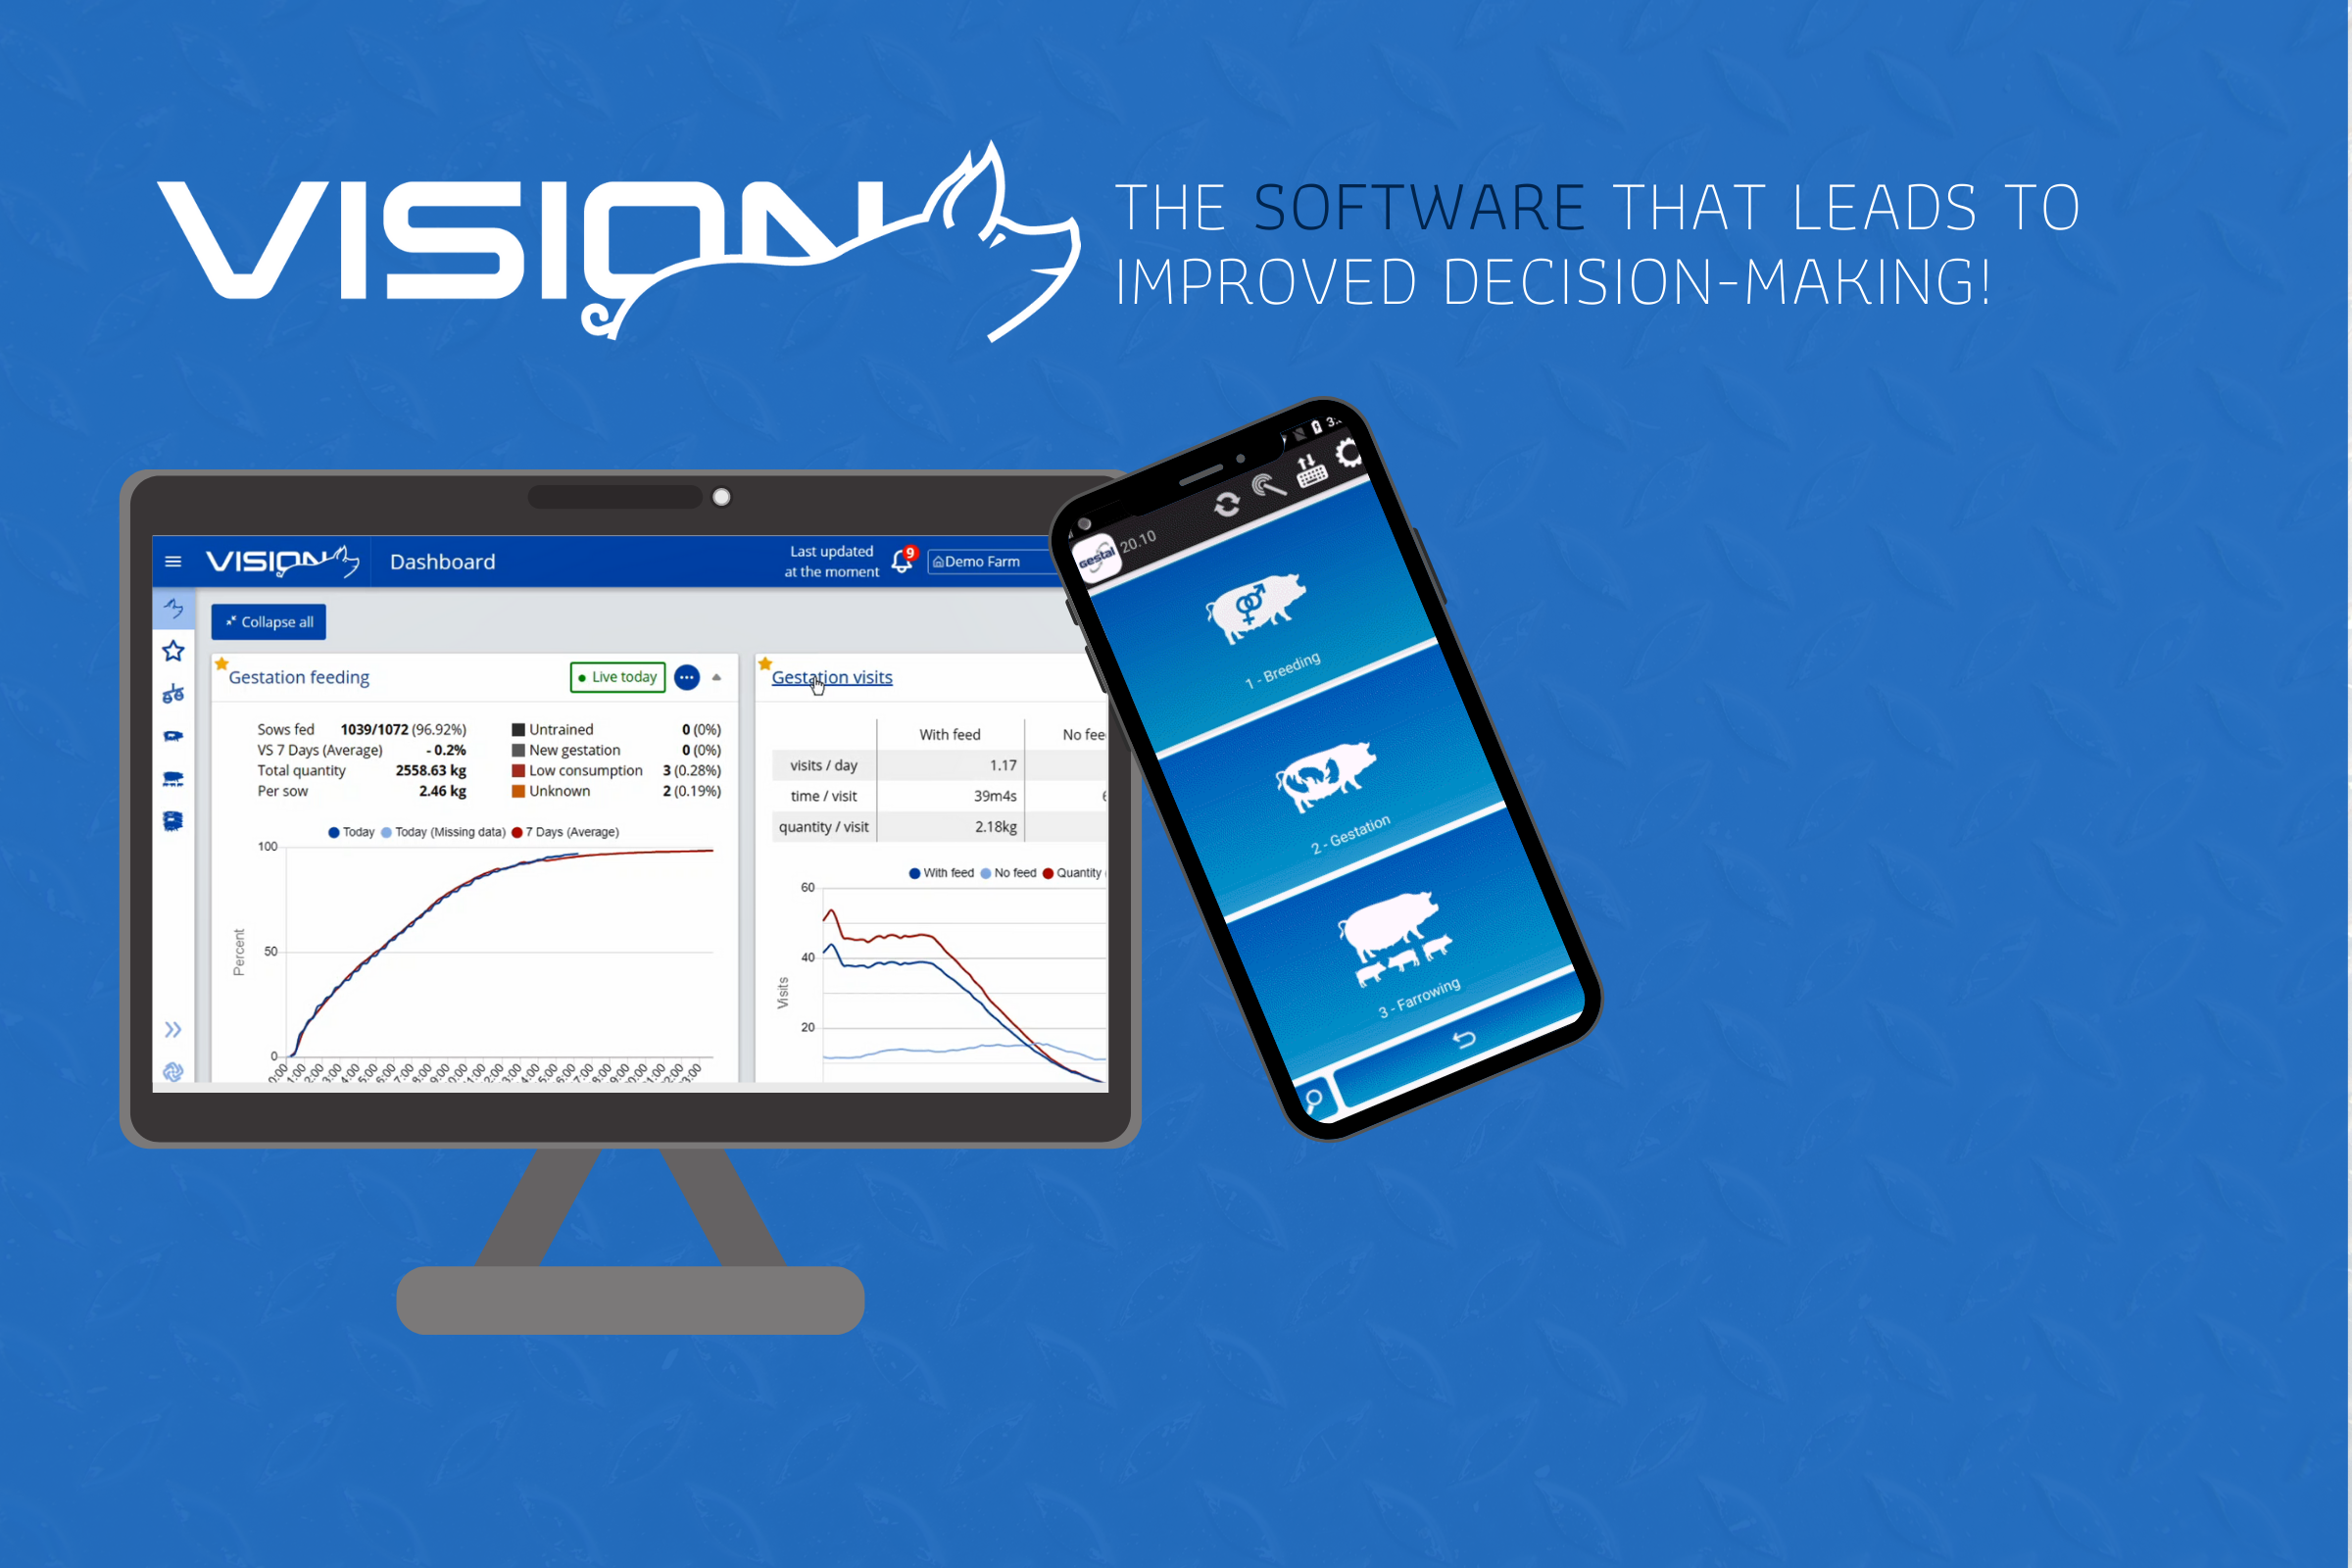 VISION - feed and herd data management software